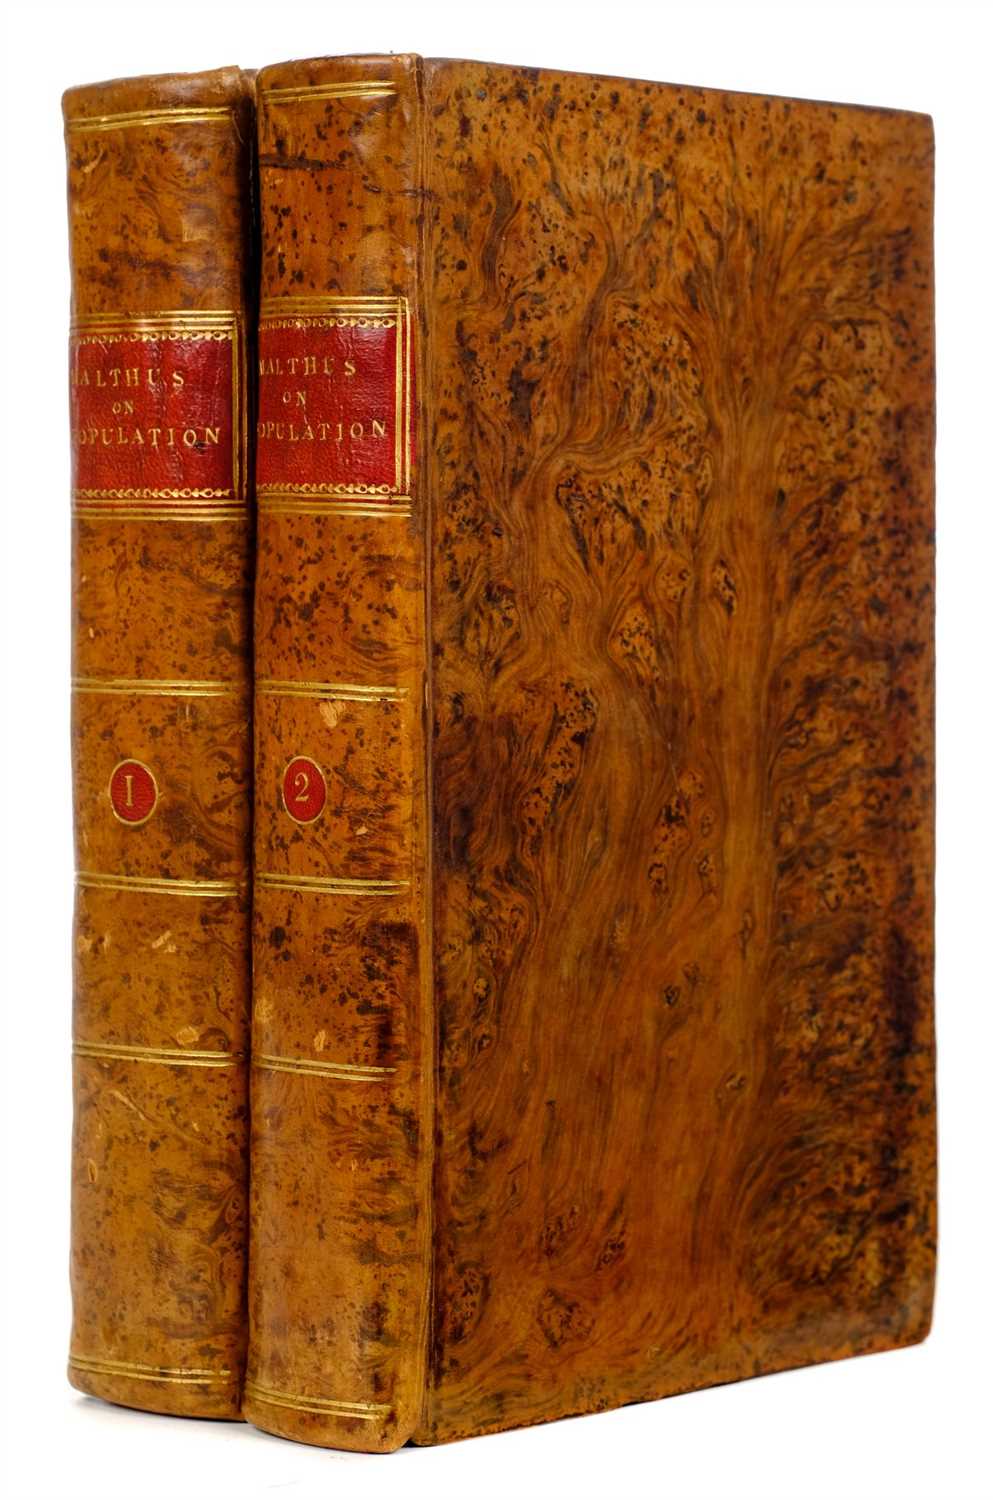 Lot 338 - Malthus (Thomas). An Essay on the Principle of Population, 3rd edition, 1806